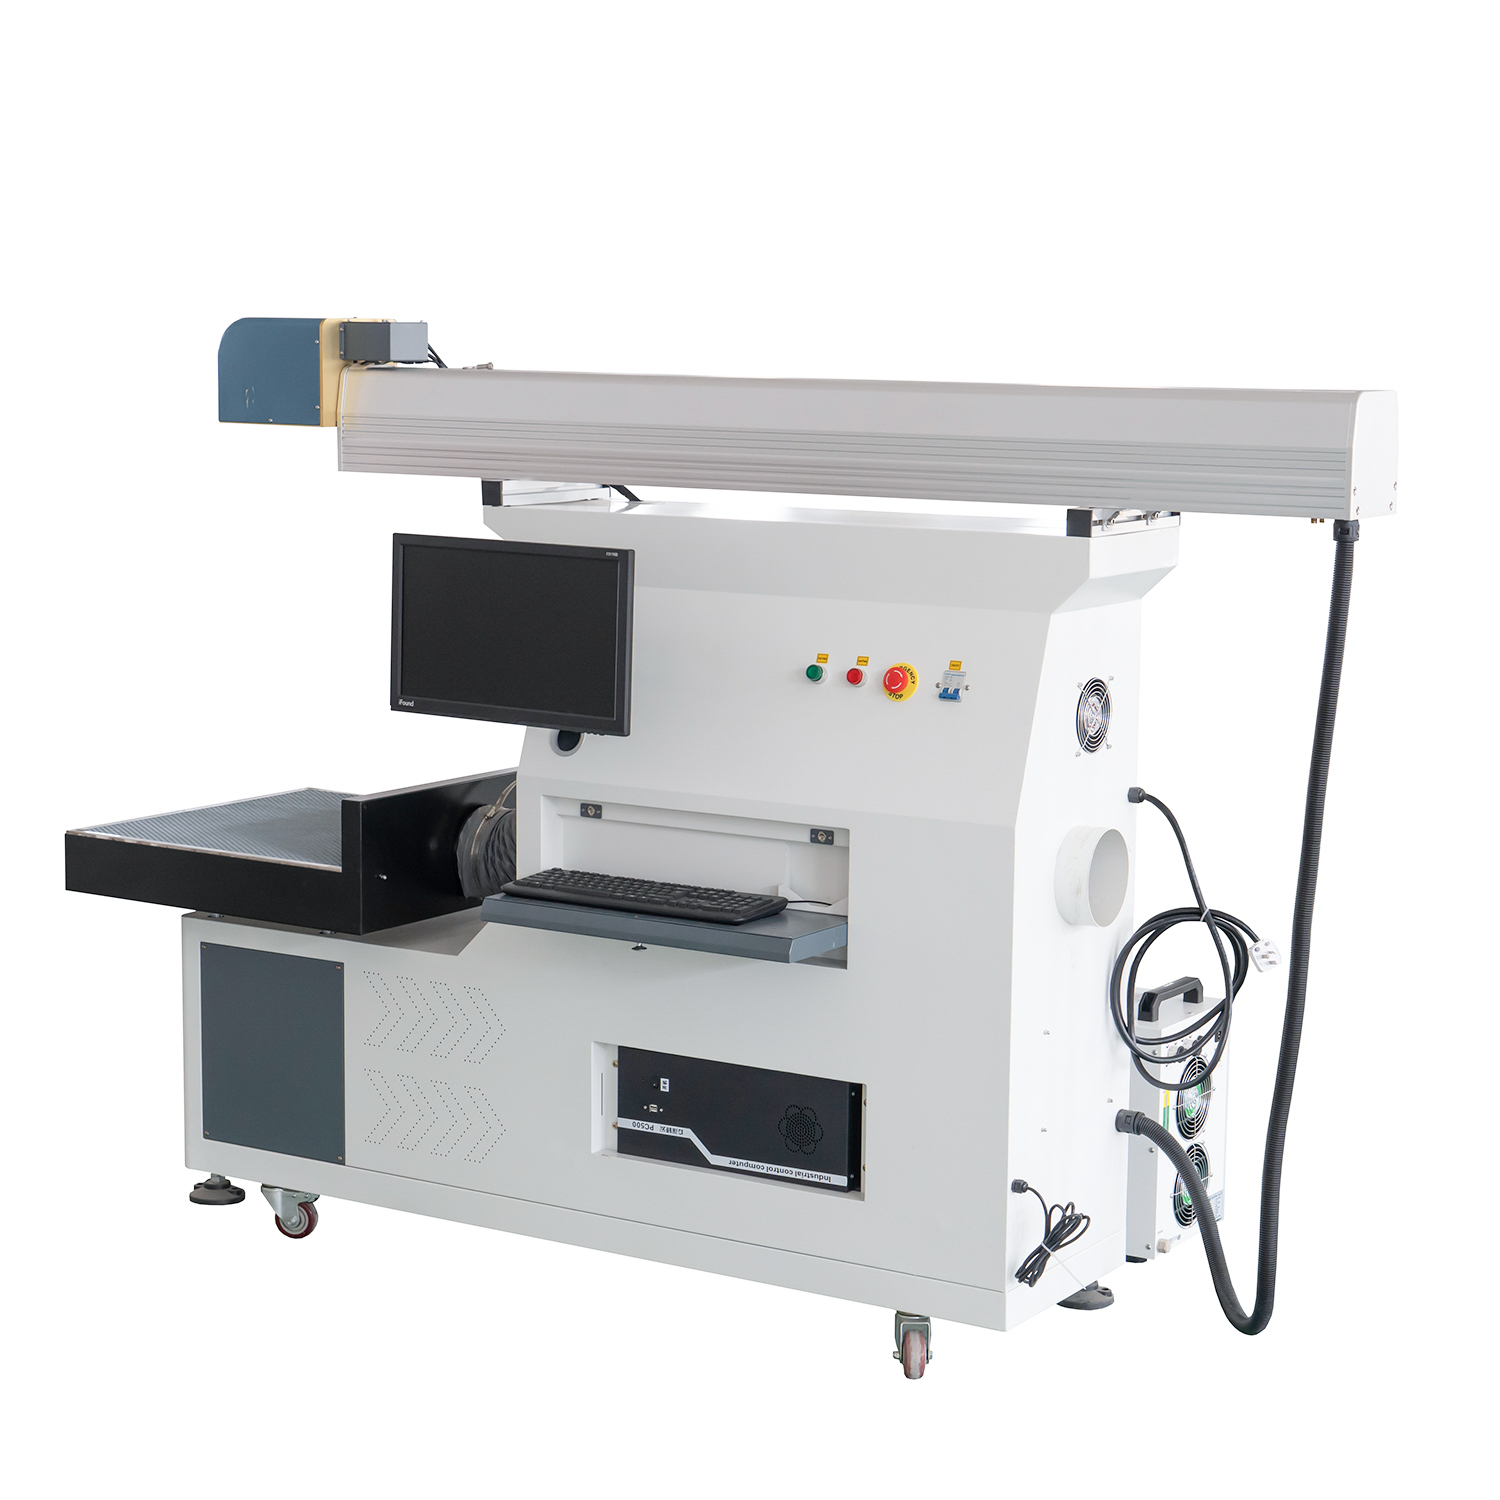 3D dynamic focusing Galvo CO2 laser marking machine 600mm working area for wood, leather, wedding paper